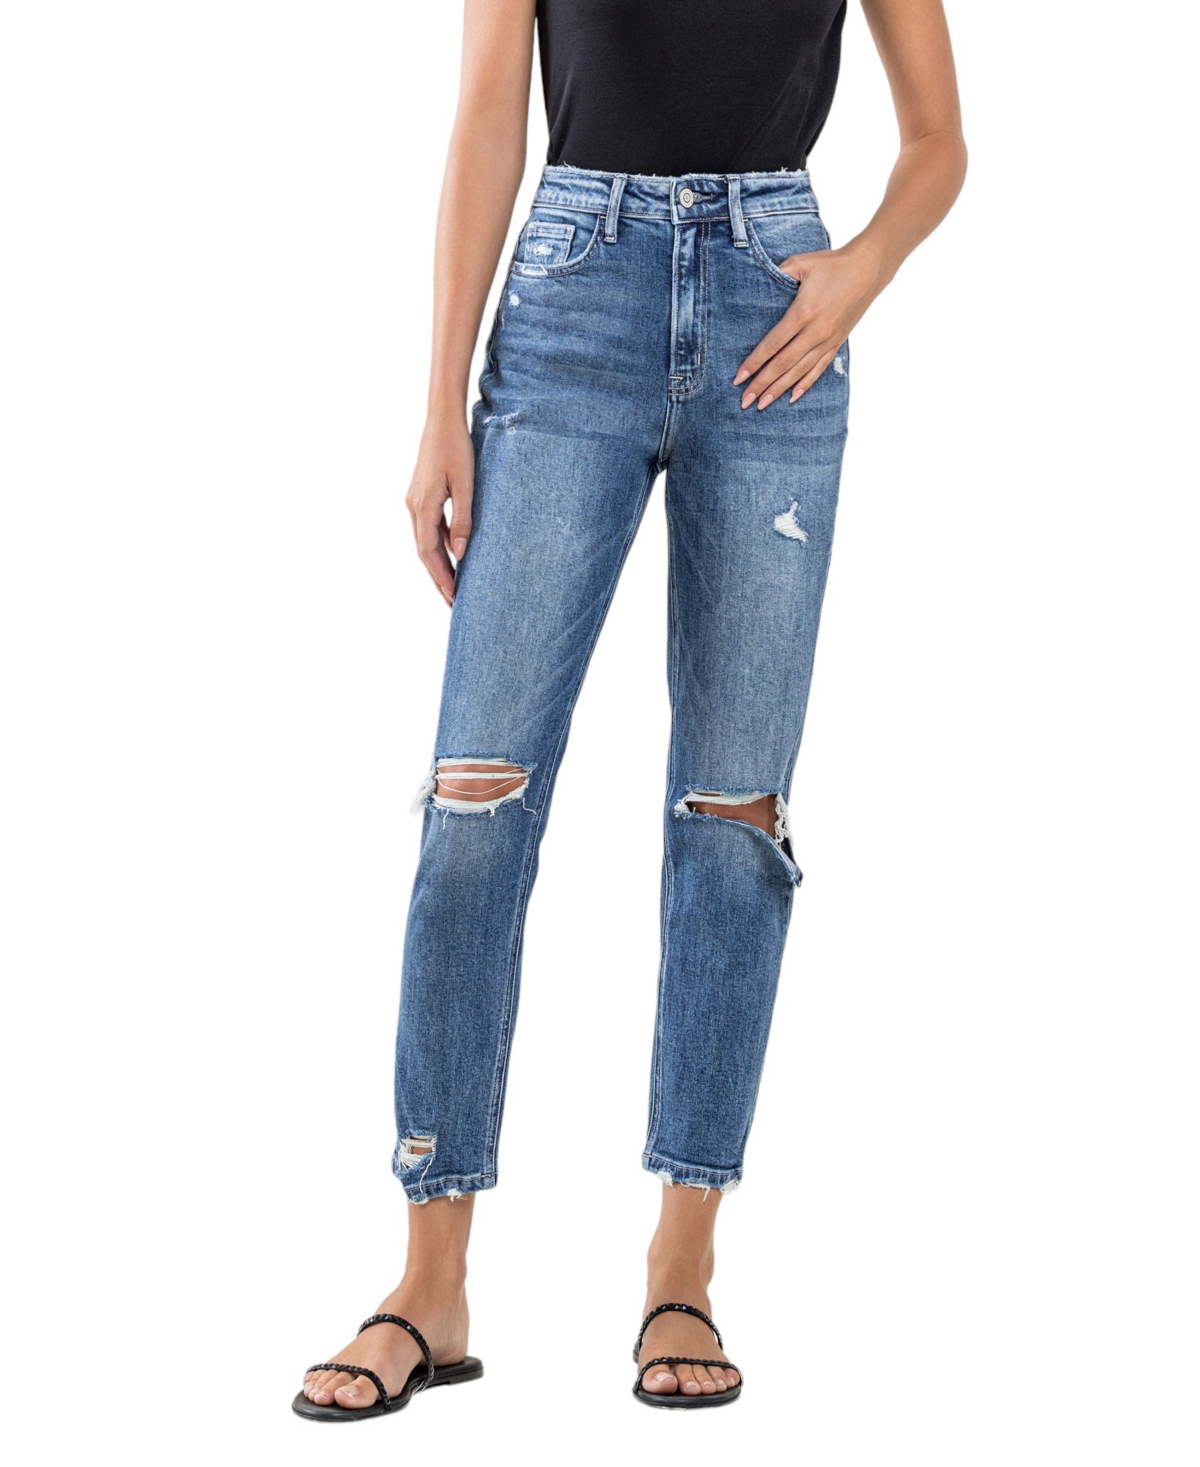 Women's Super High Rise Distressed Mom Jeans - Last night